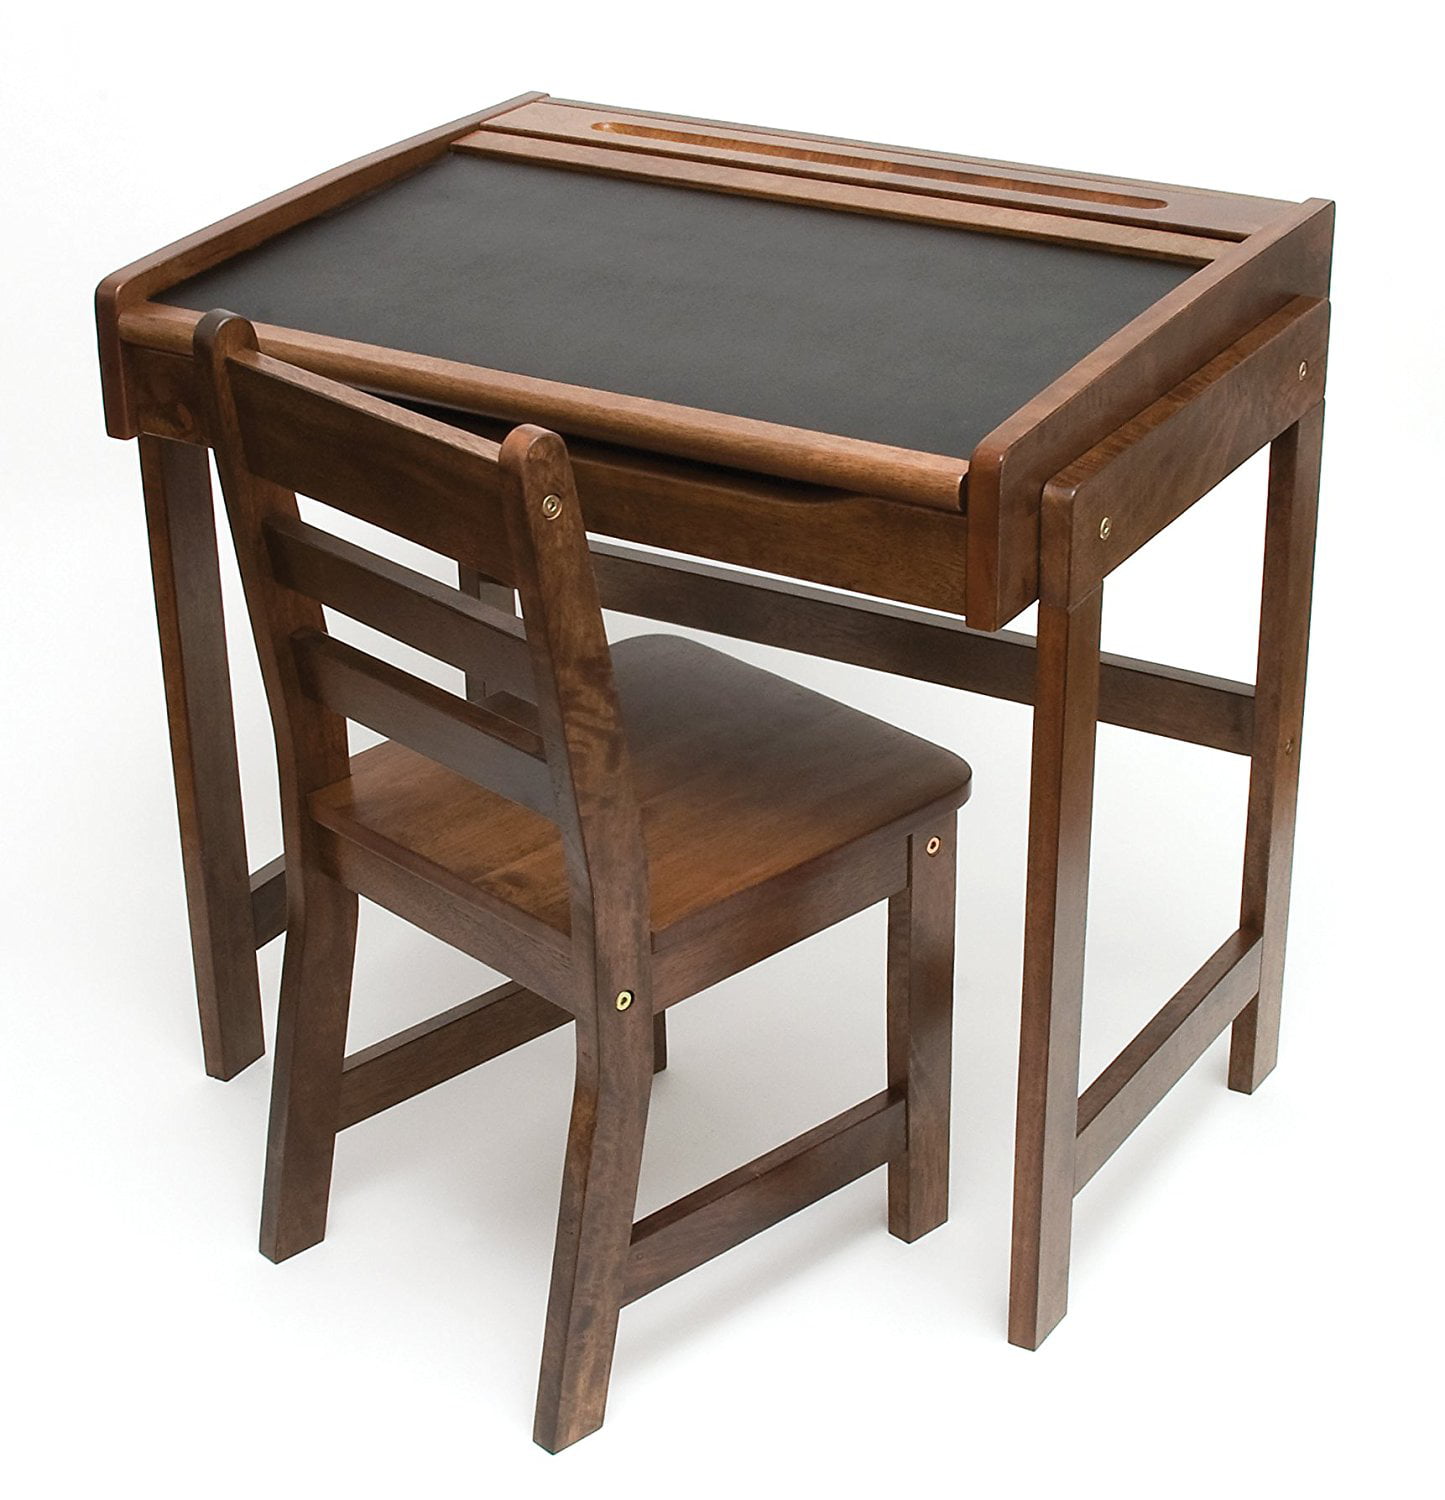 child's school desk and chair set